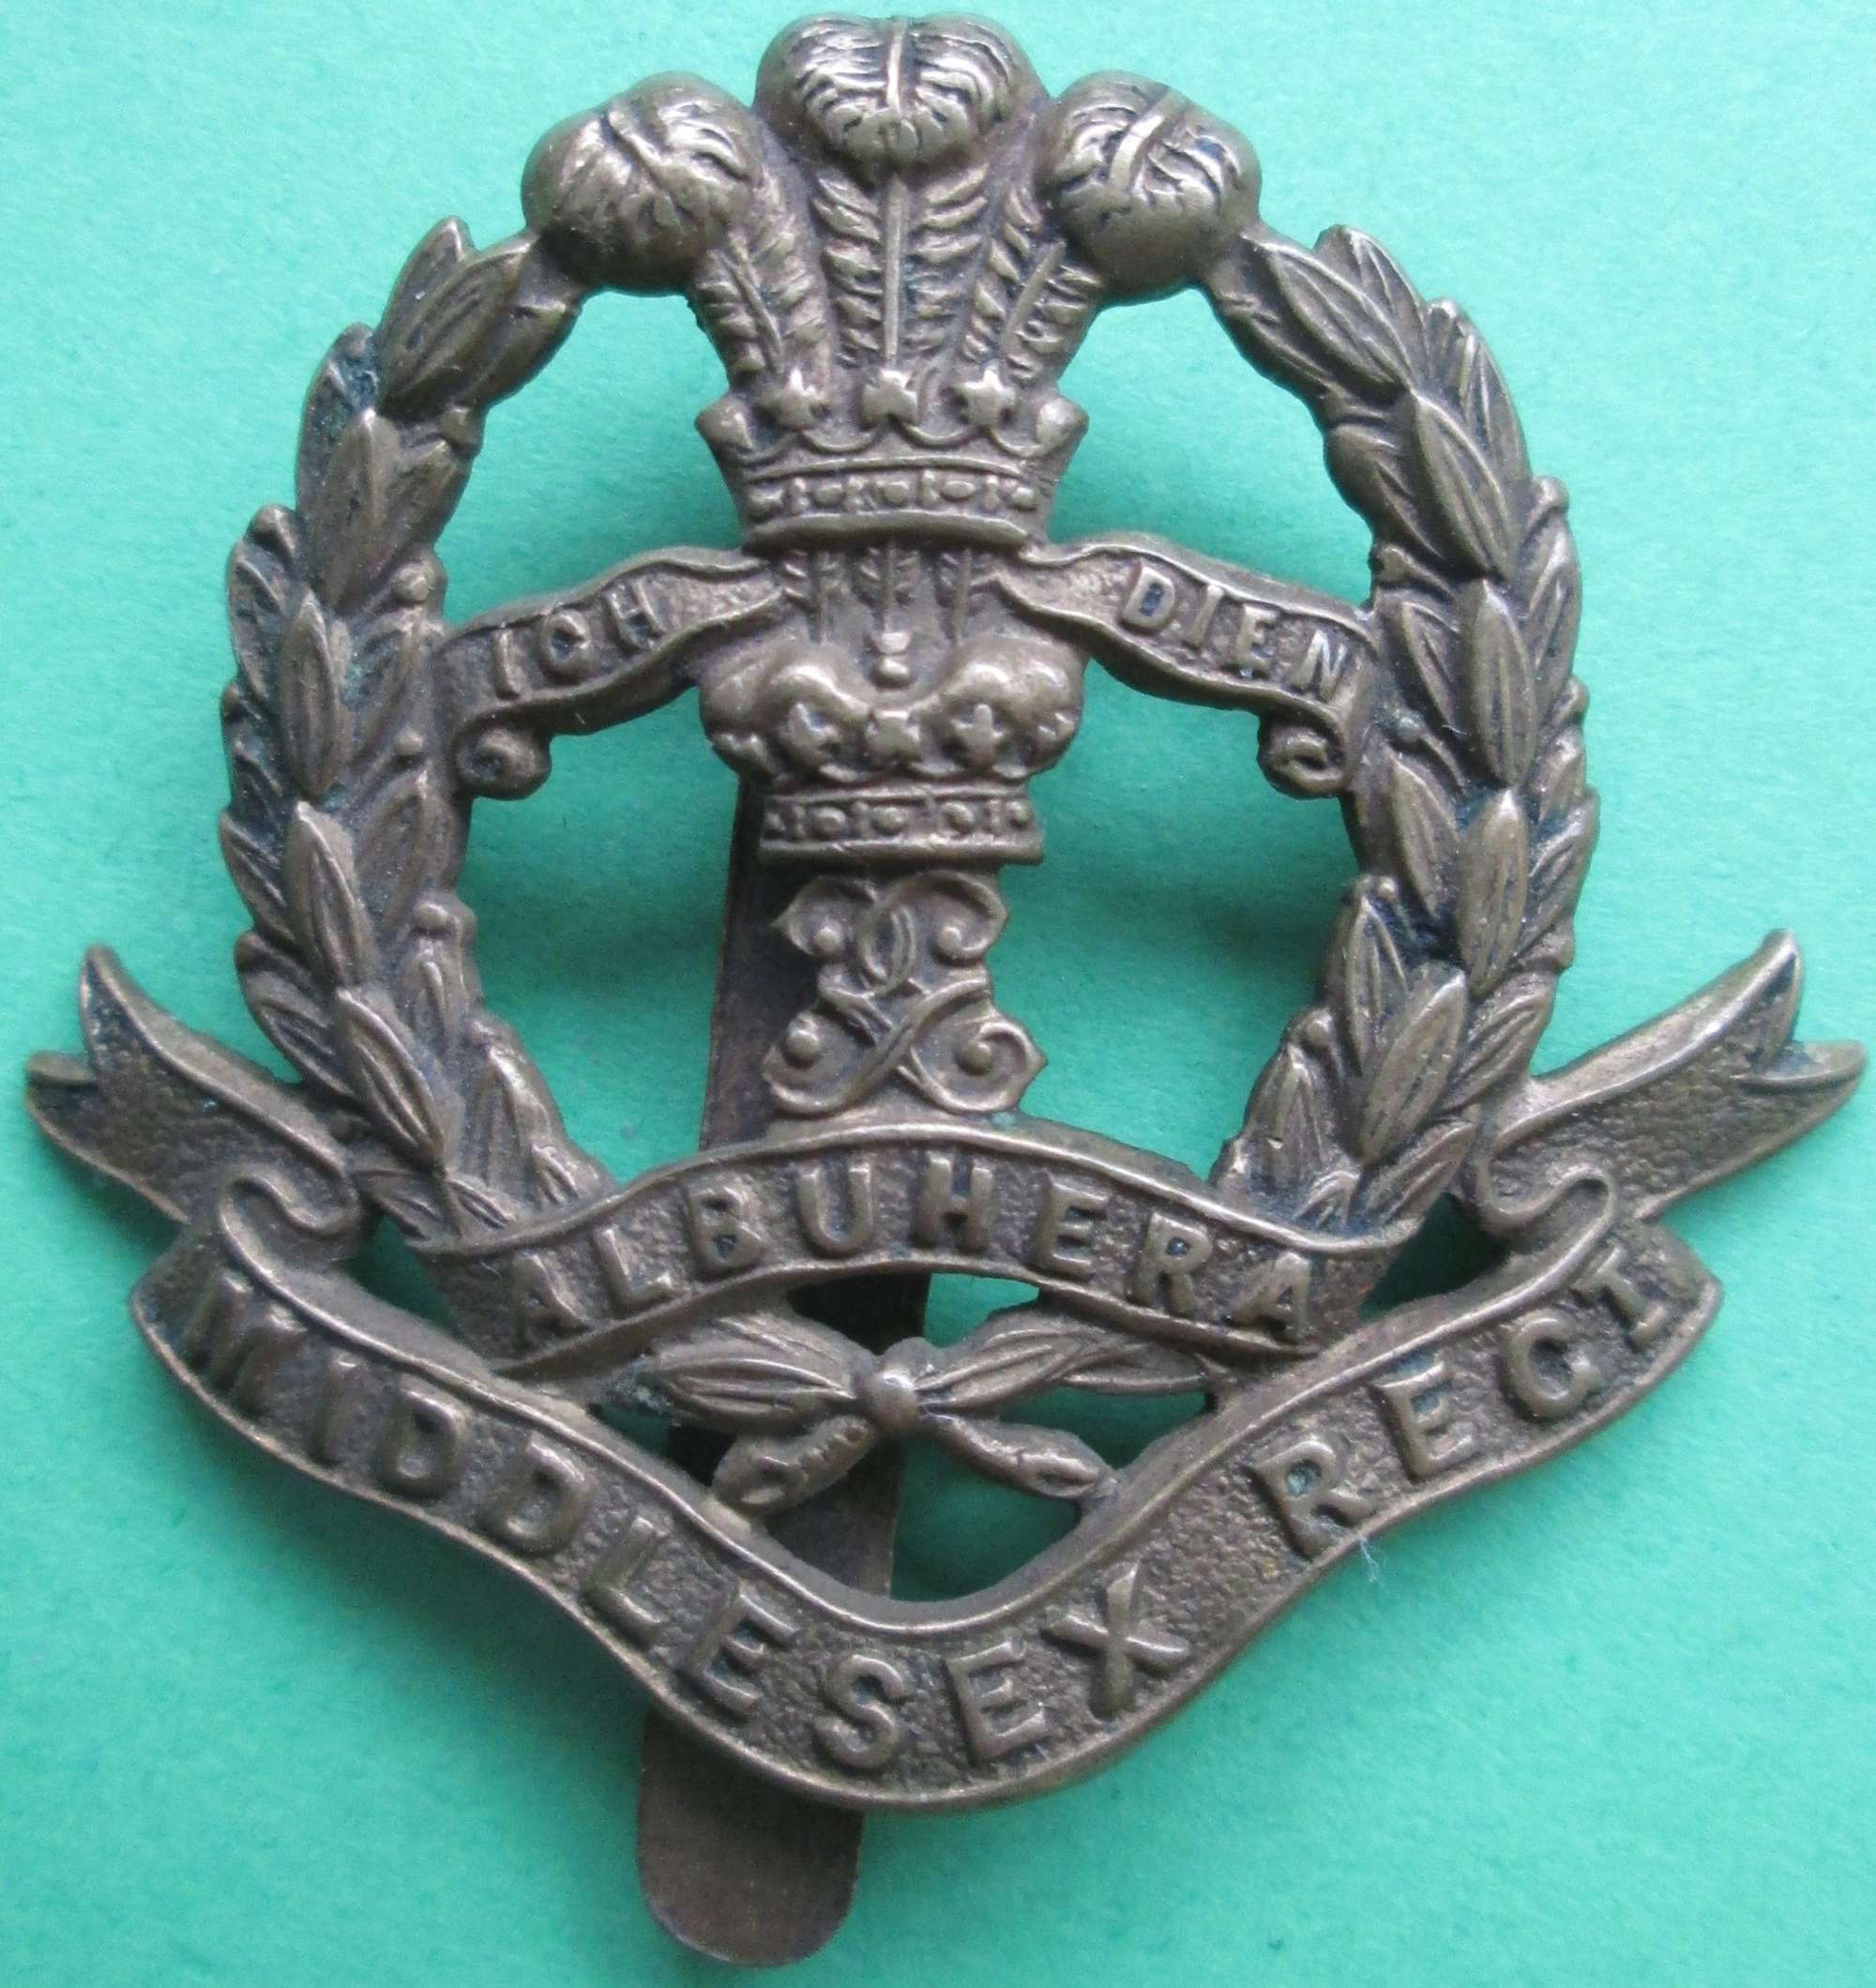 A WWI MIDDLESEX REGT OTHER RANKS ECONOMY CAP BADGE